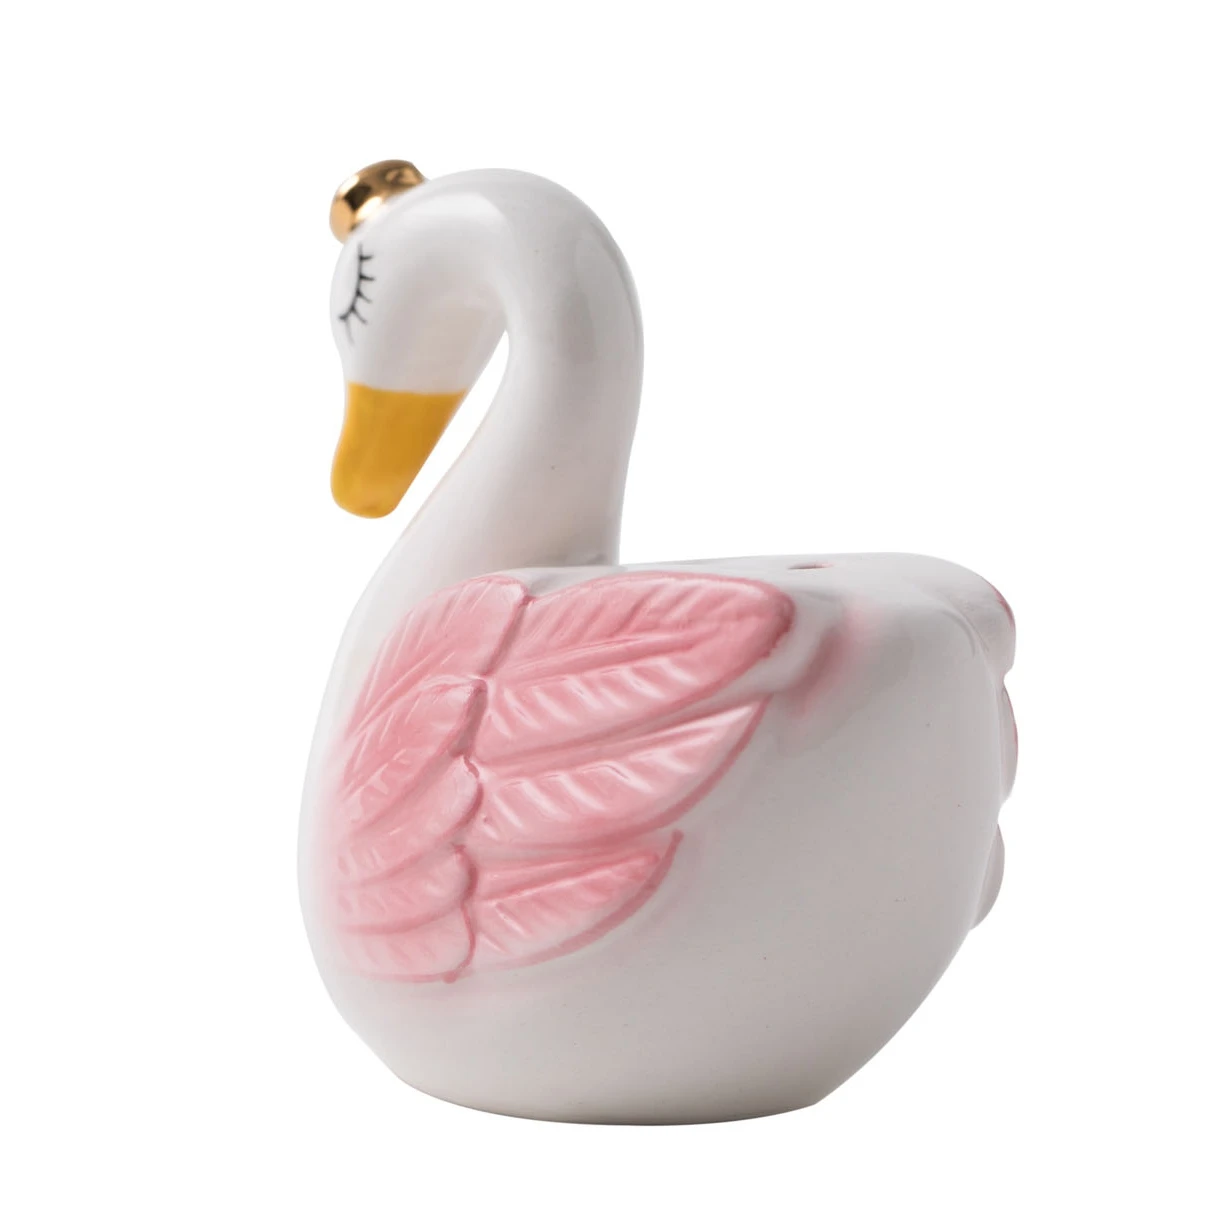 Wholesale ceramic swan shape kitchen condiment salt and pepper shakers wedding party favors and gift for guests